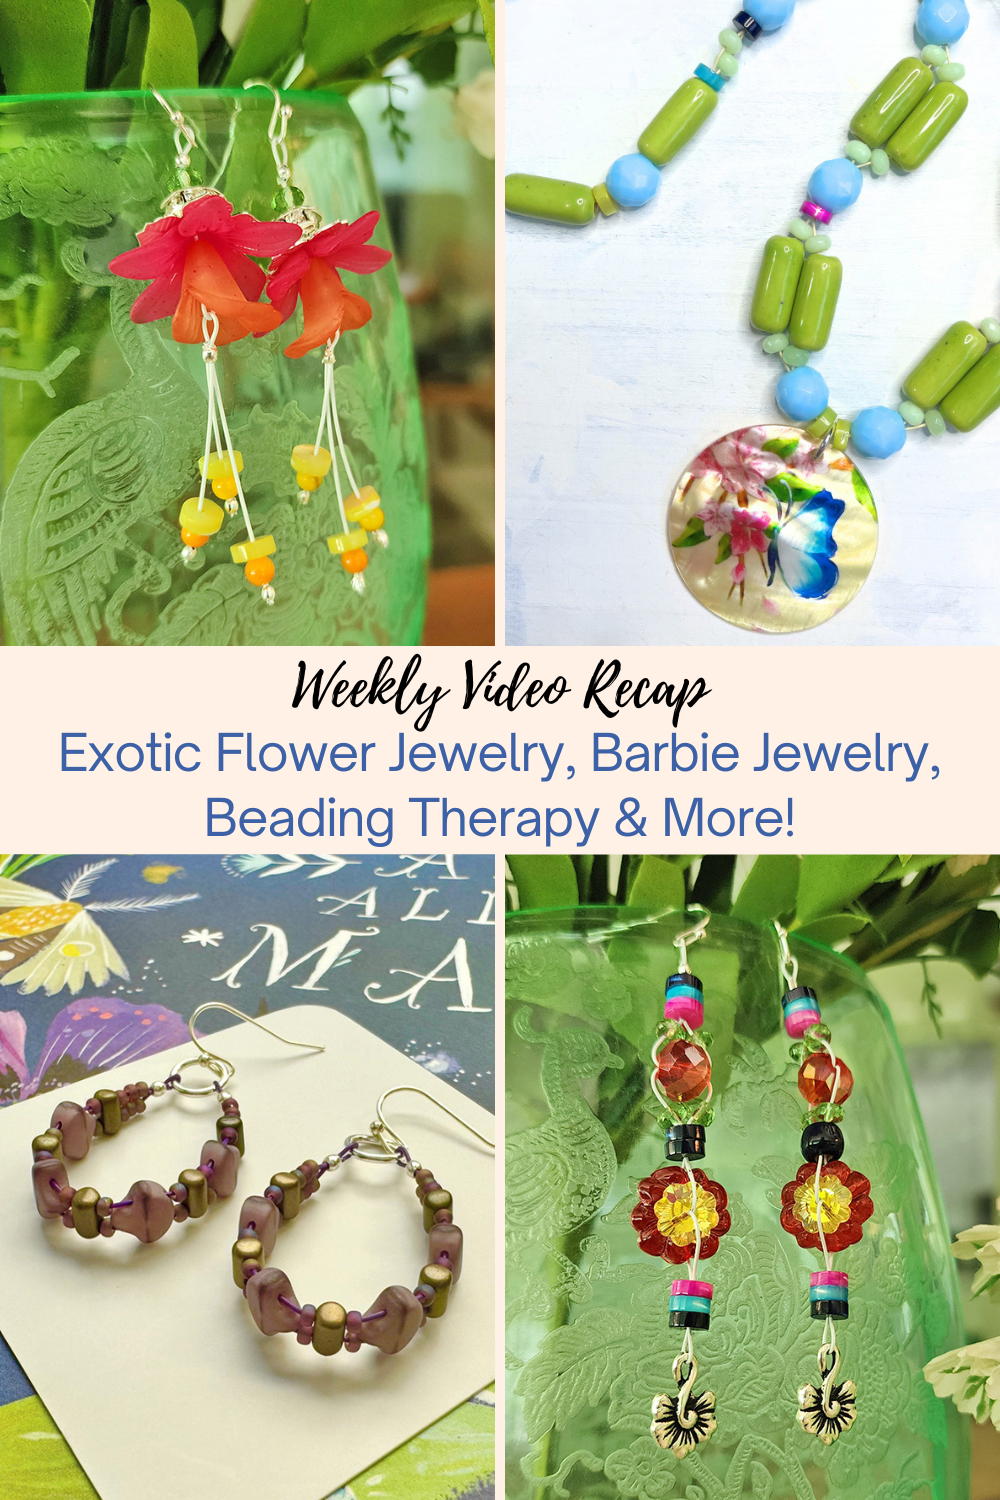 Exotic Flower Jewelry, Barbie Jewelry, Beading Therapy & More! Collage